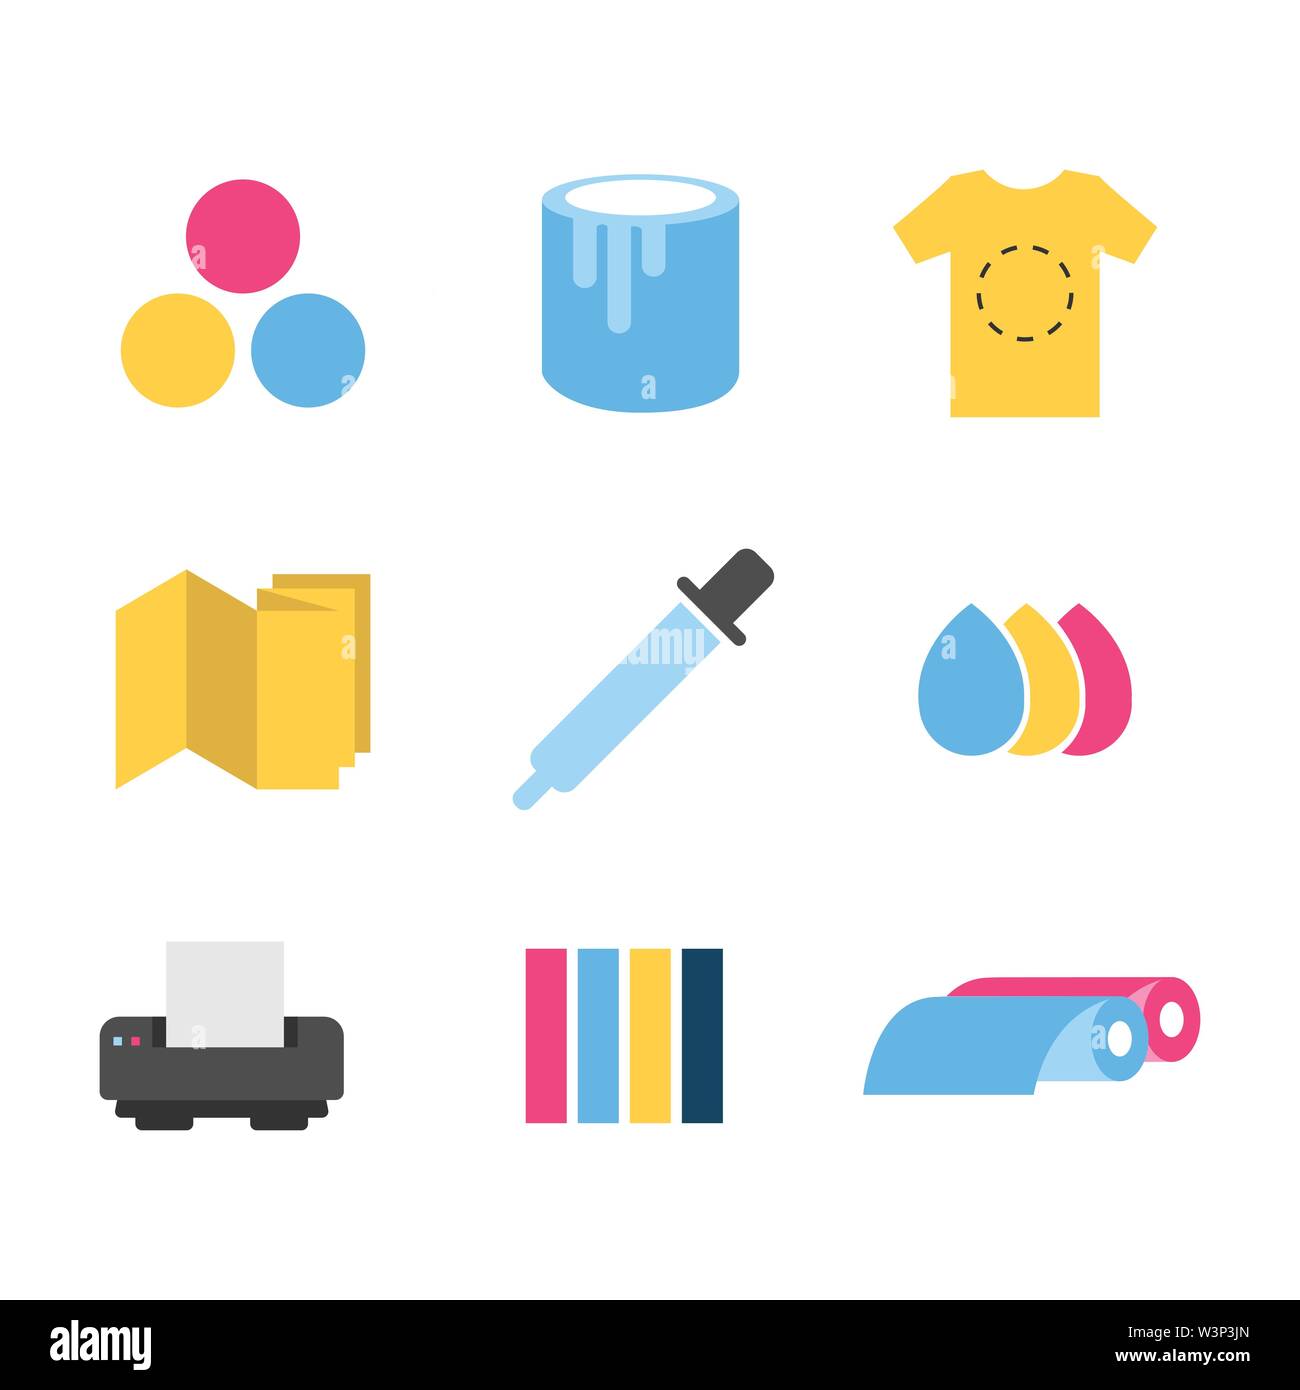 Print icons set colorful flat design vector illustration Stock Vector